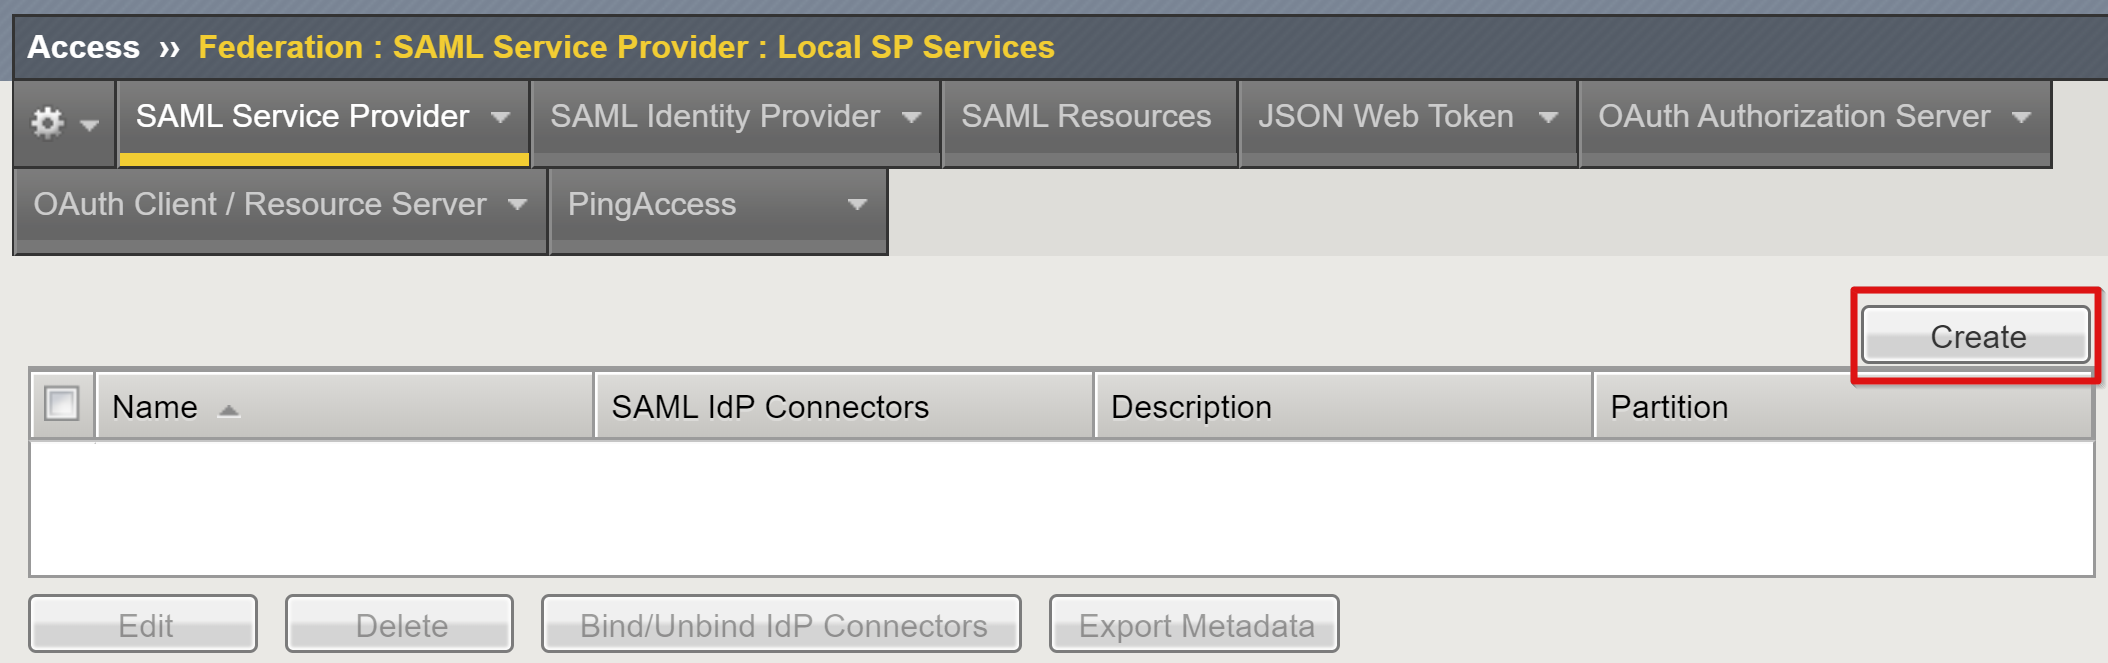 Screenshot of the Create option under SAML Service Provider on Local SP Services.